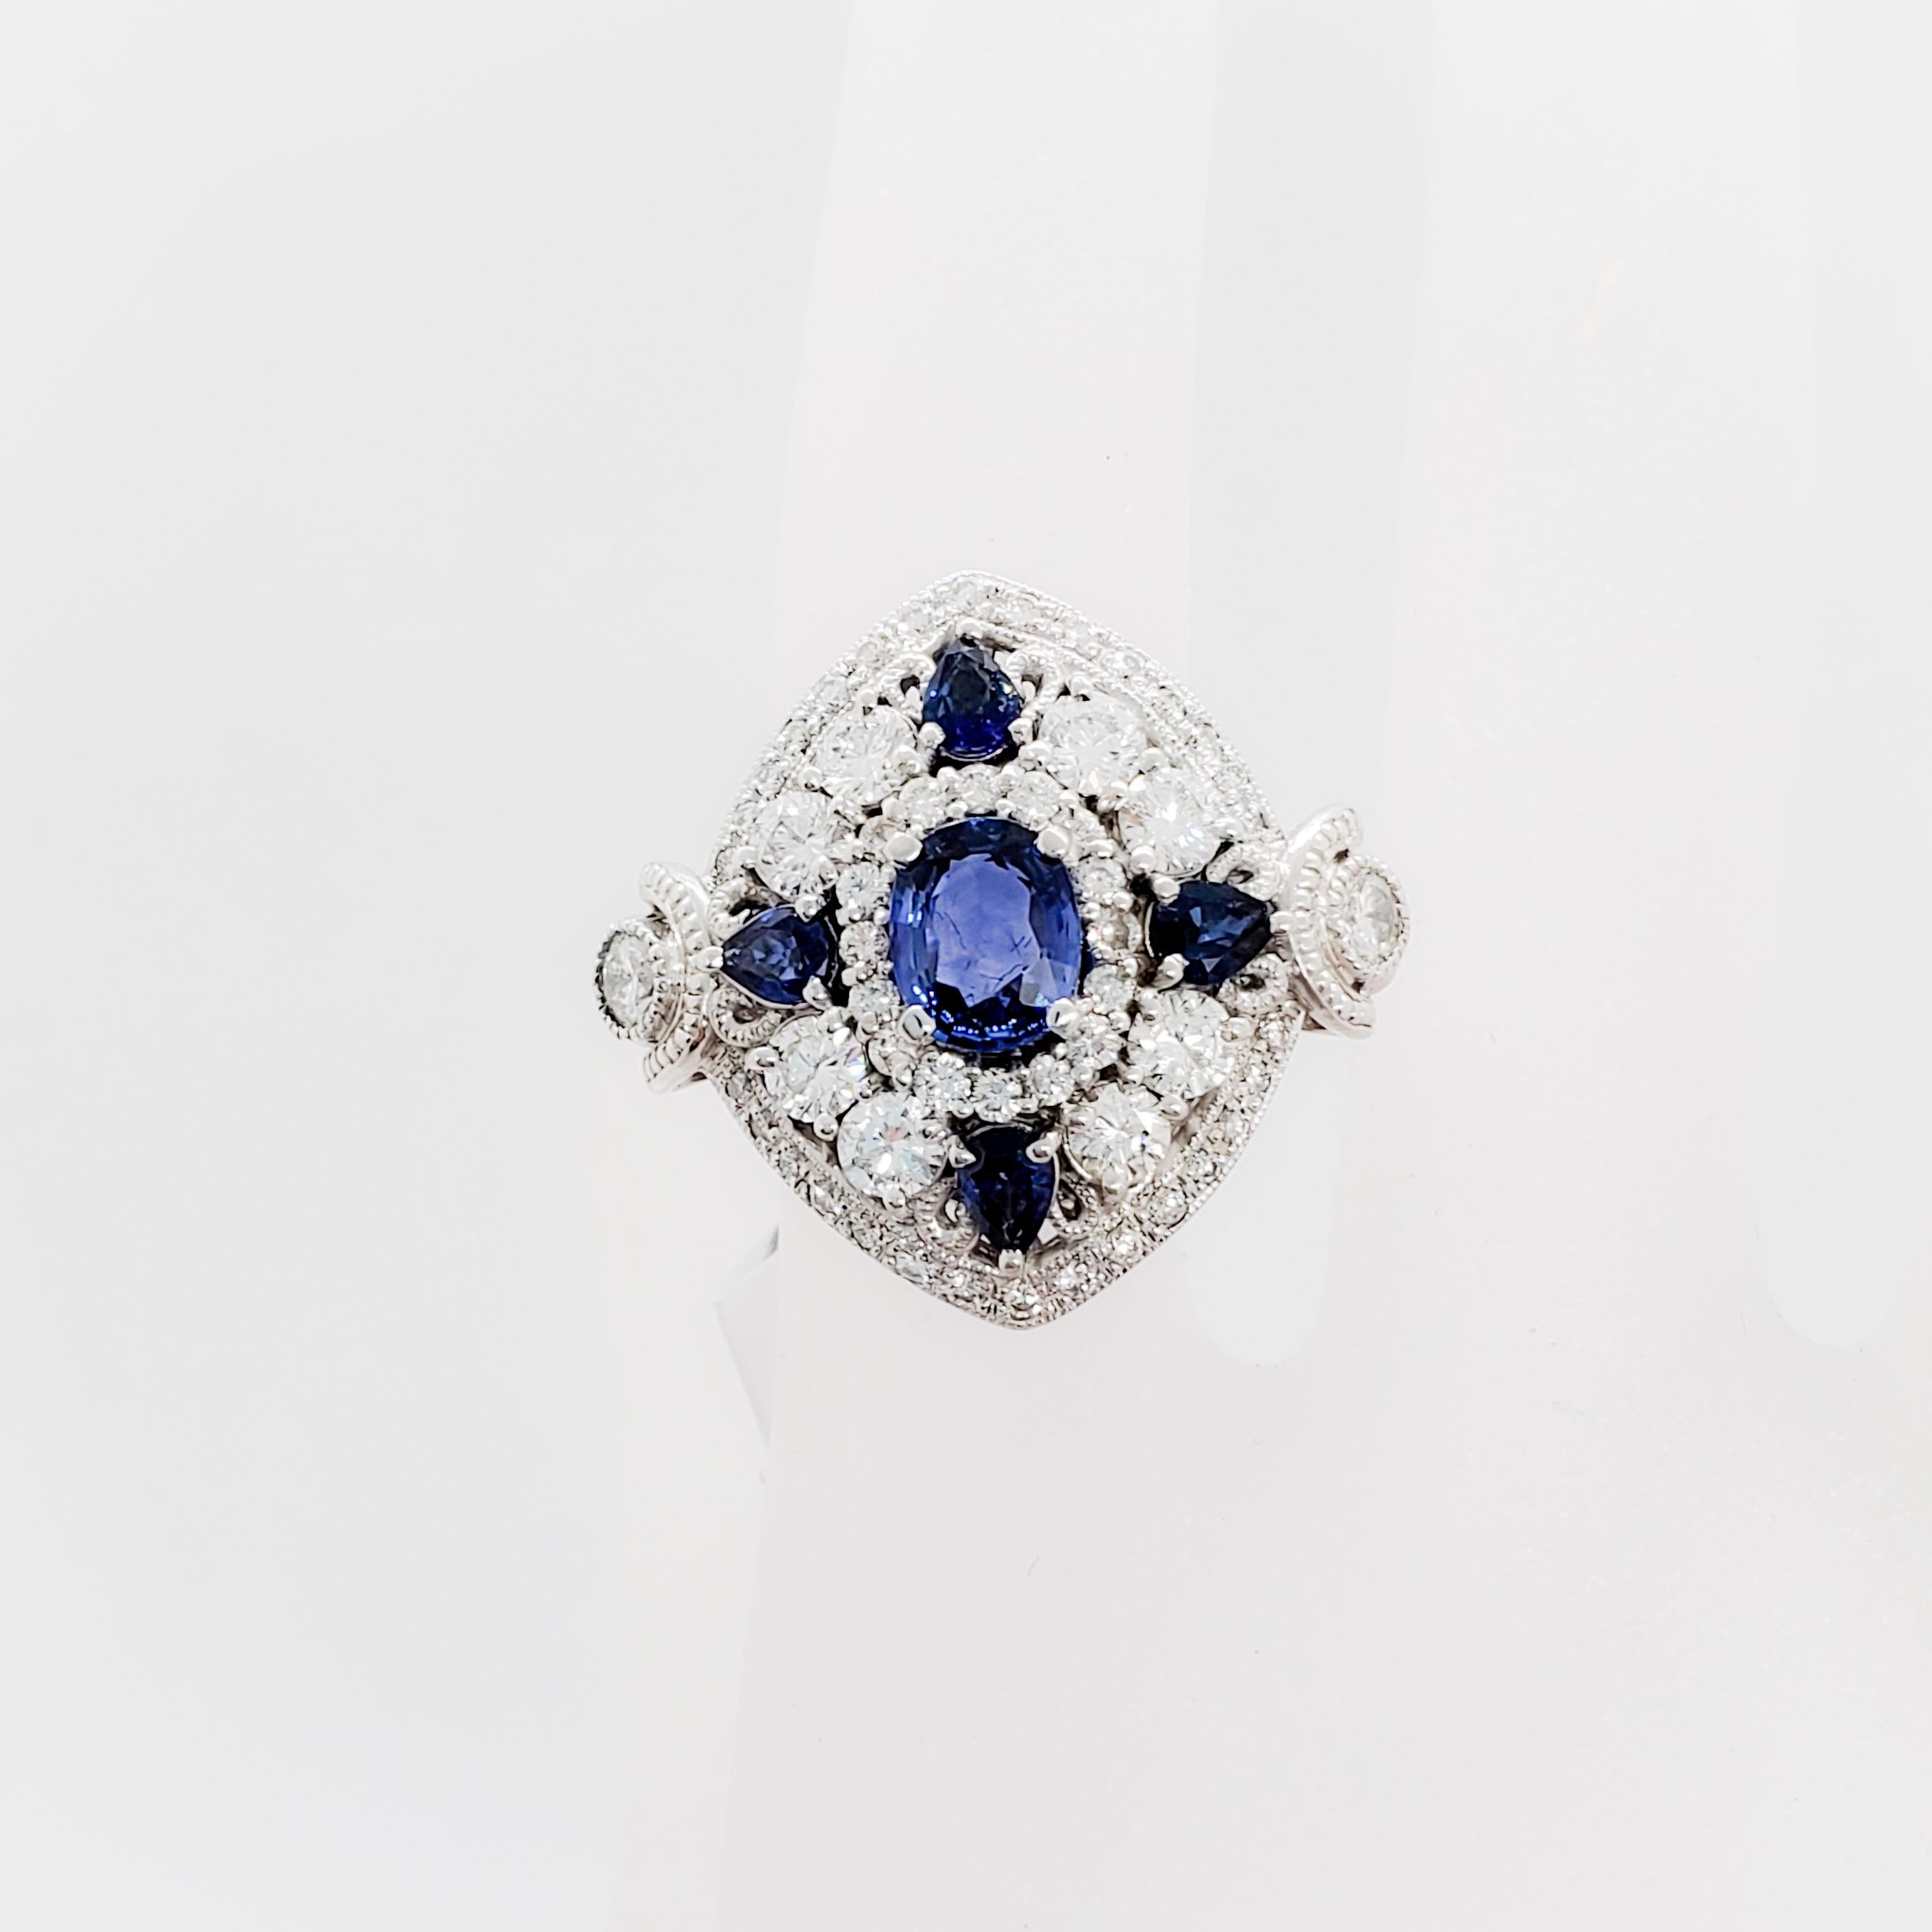 Gorgeous blue sapphire oval and pear shapes with dark blue color and good crystal weighing 2.43 carats.  1.02 carats of good quality white diamonds in a 18k white gold mounting.  Ring size 5.75.  